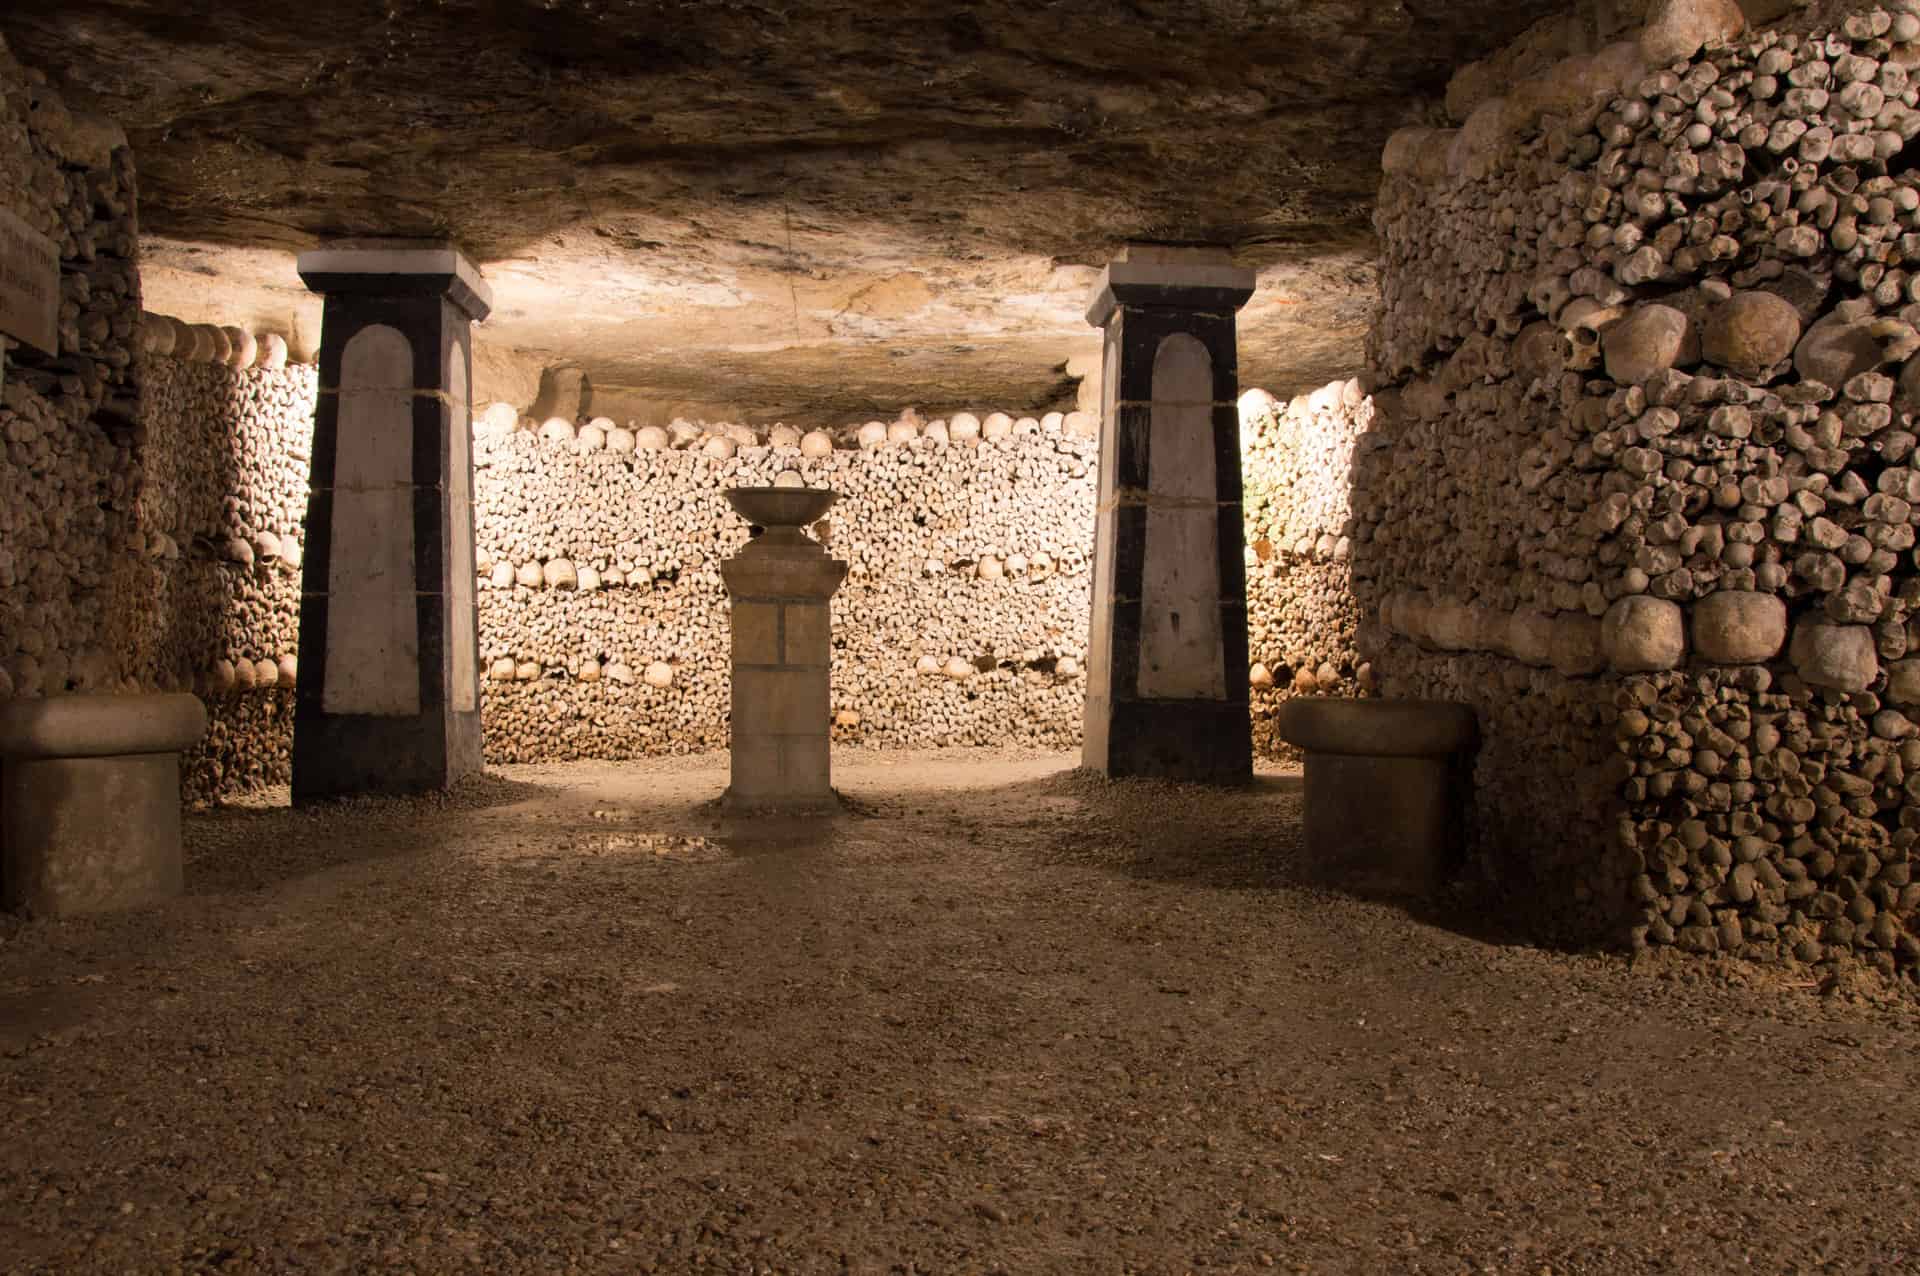 Inside view of The Catacombs of Paris